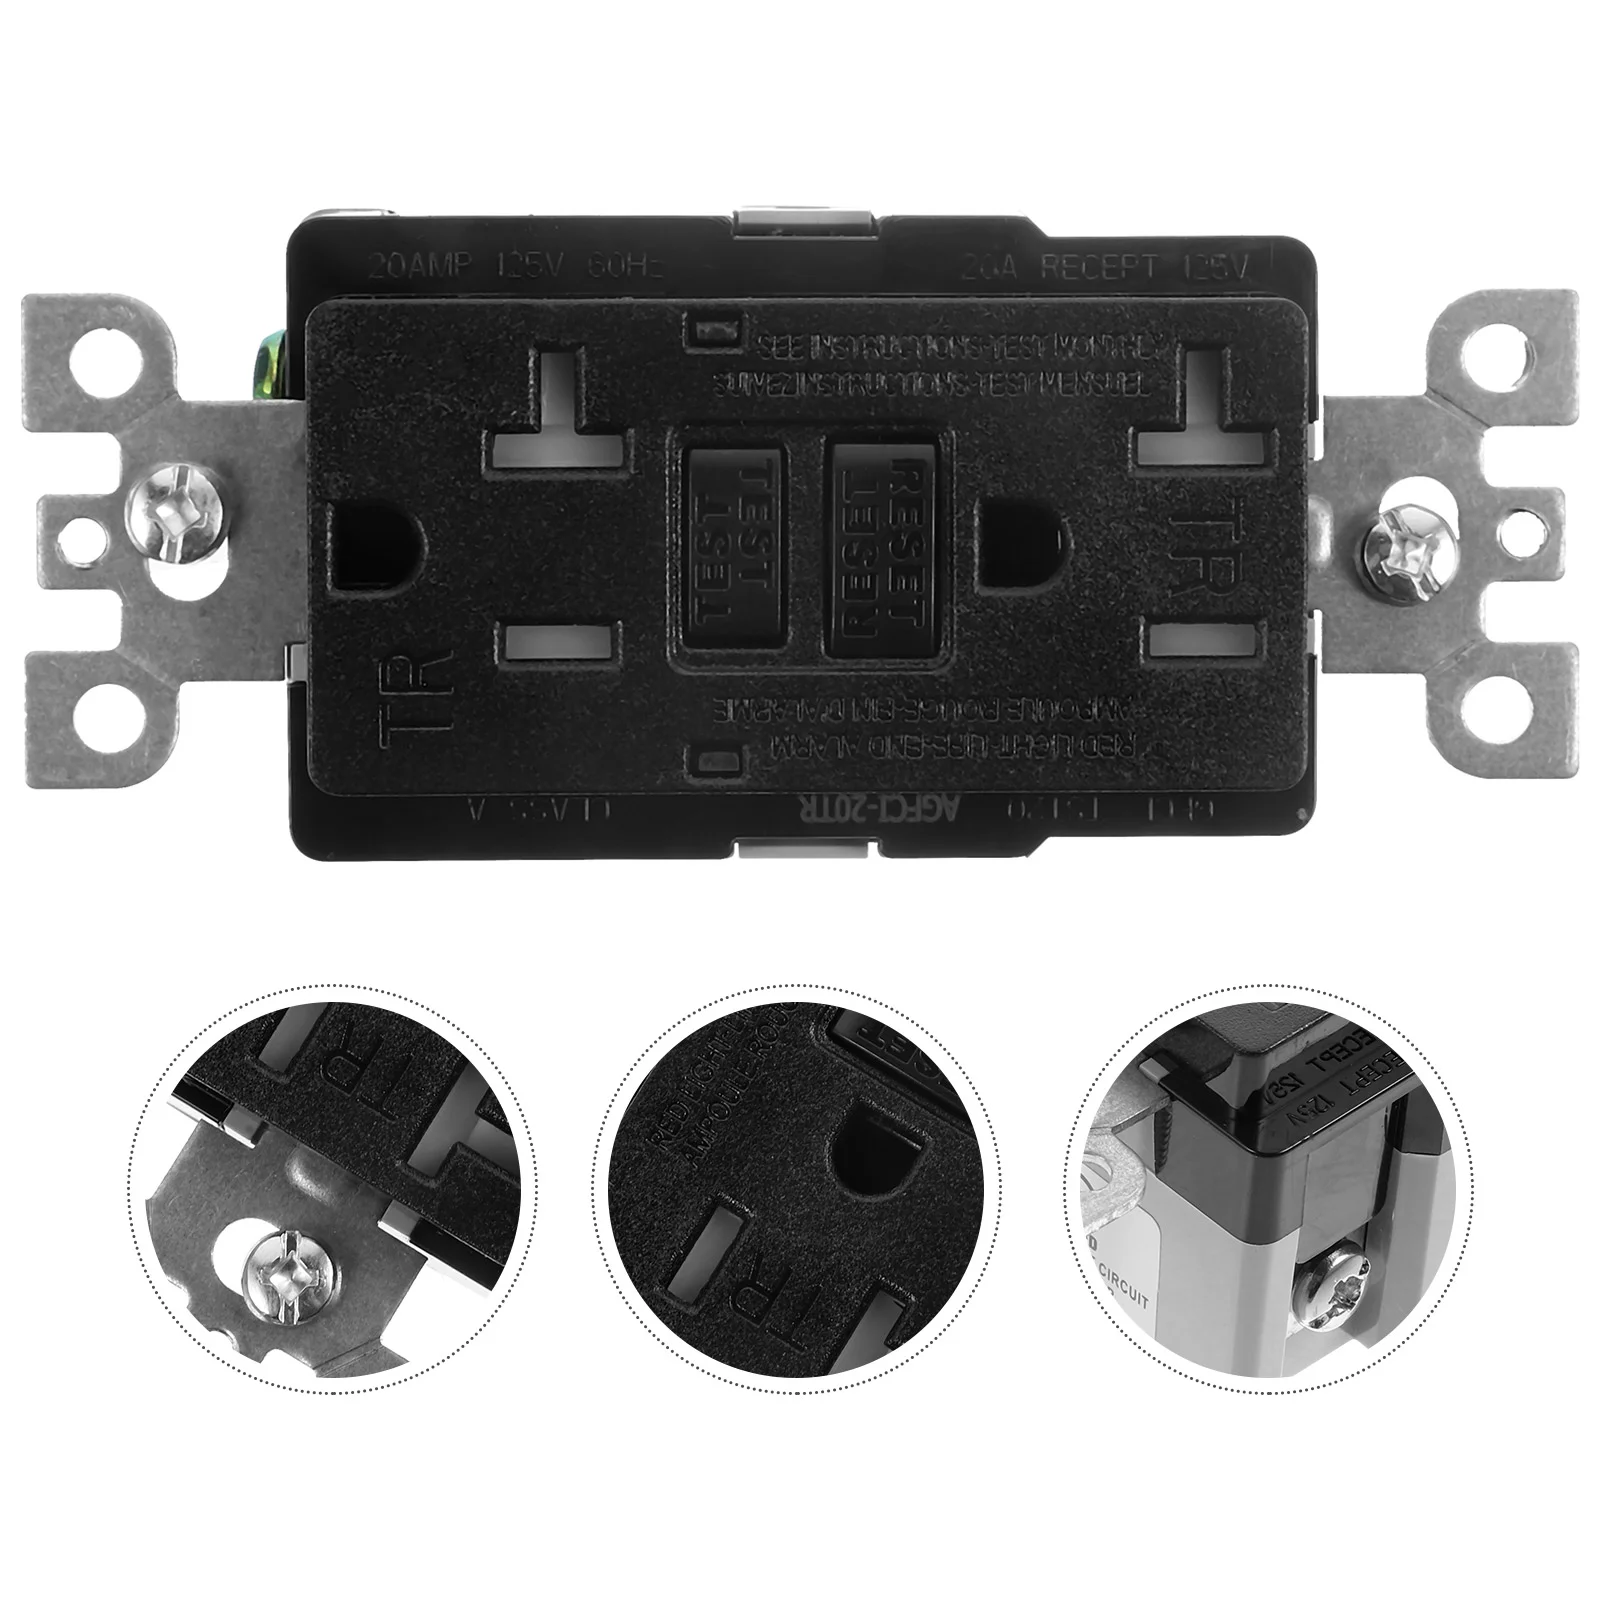 

Socket 20 Amp Gfci Outlet Gfi Bathroom Electric Outdoor Electrical Outlets Standard Ground Fault Receptacle Black